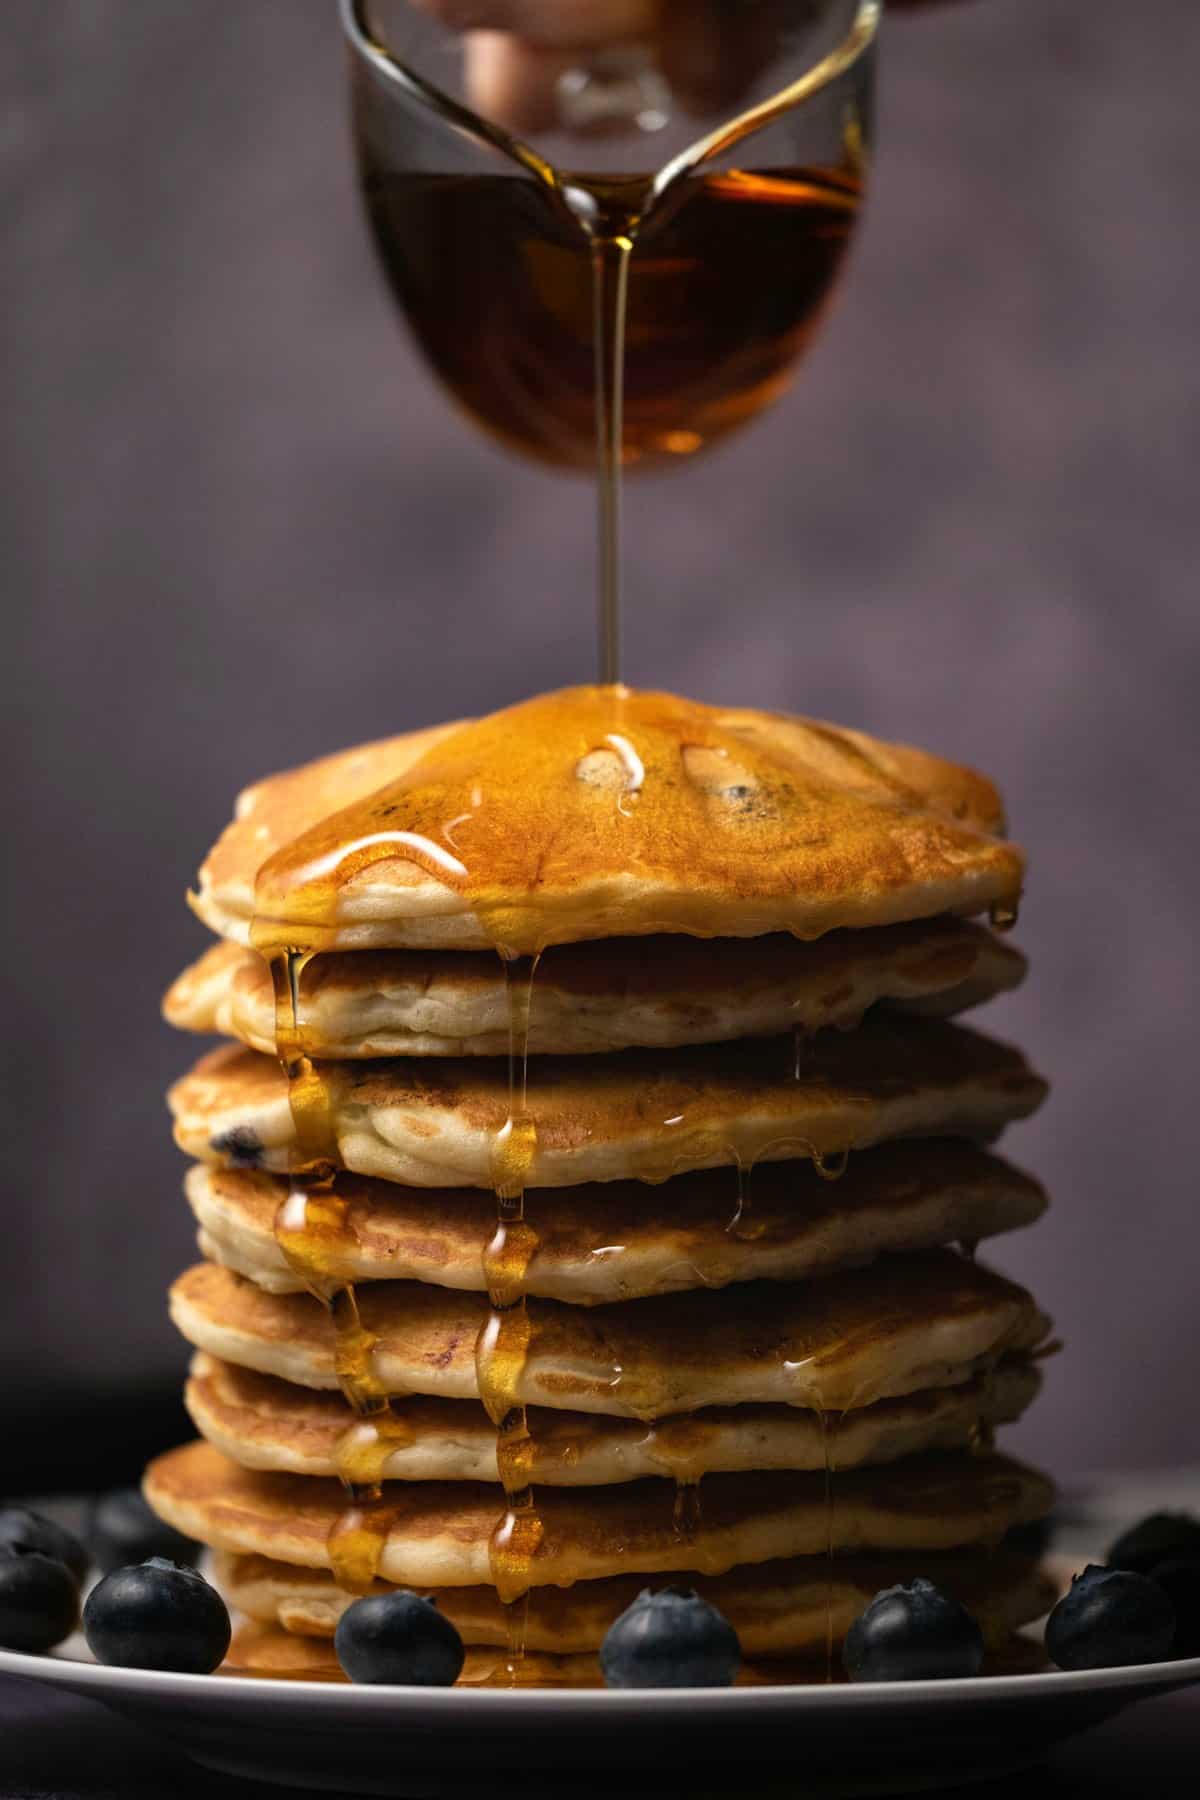 Syrup pouring from a glass jug over a stack of pancakes. 